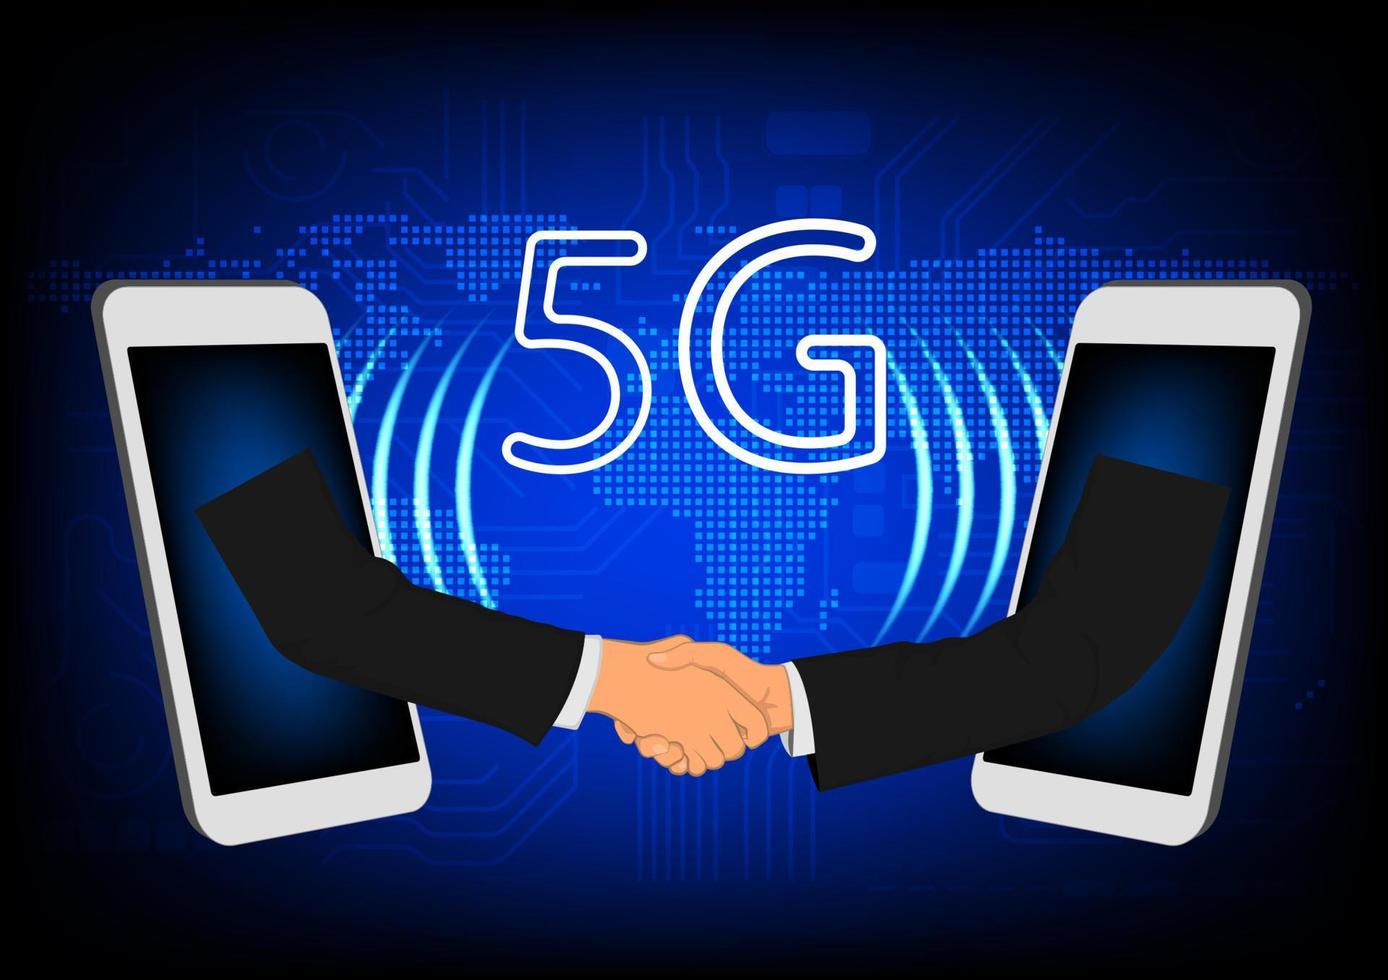 image graphics technology 5G network world global network by smartphone concept networking connection technology vector illustration